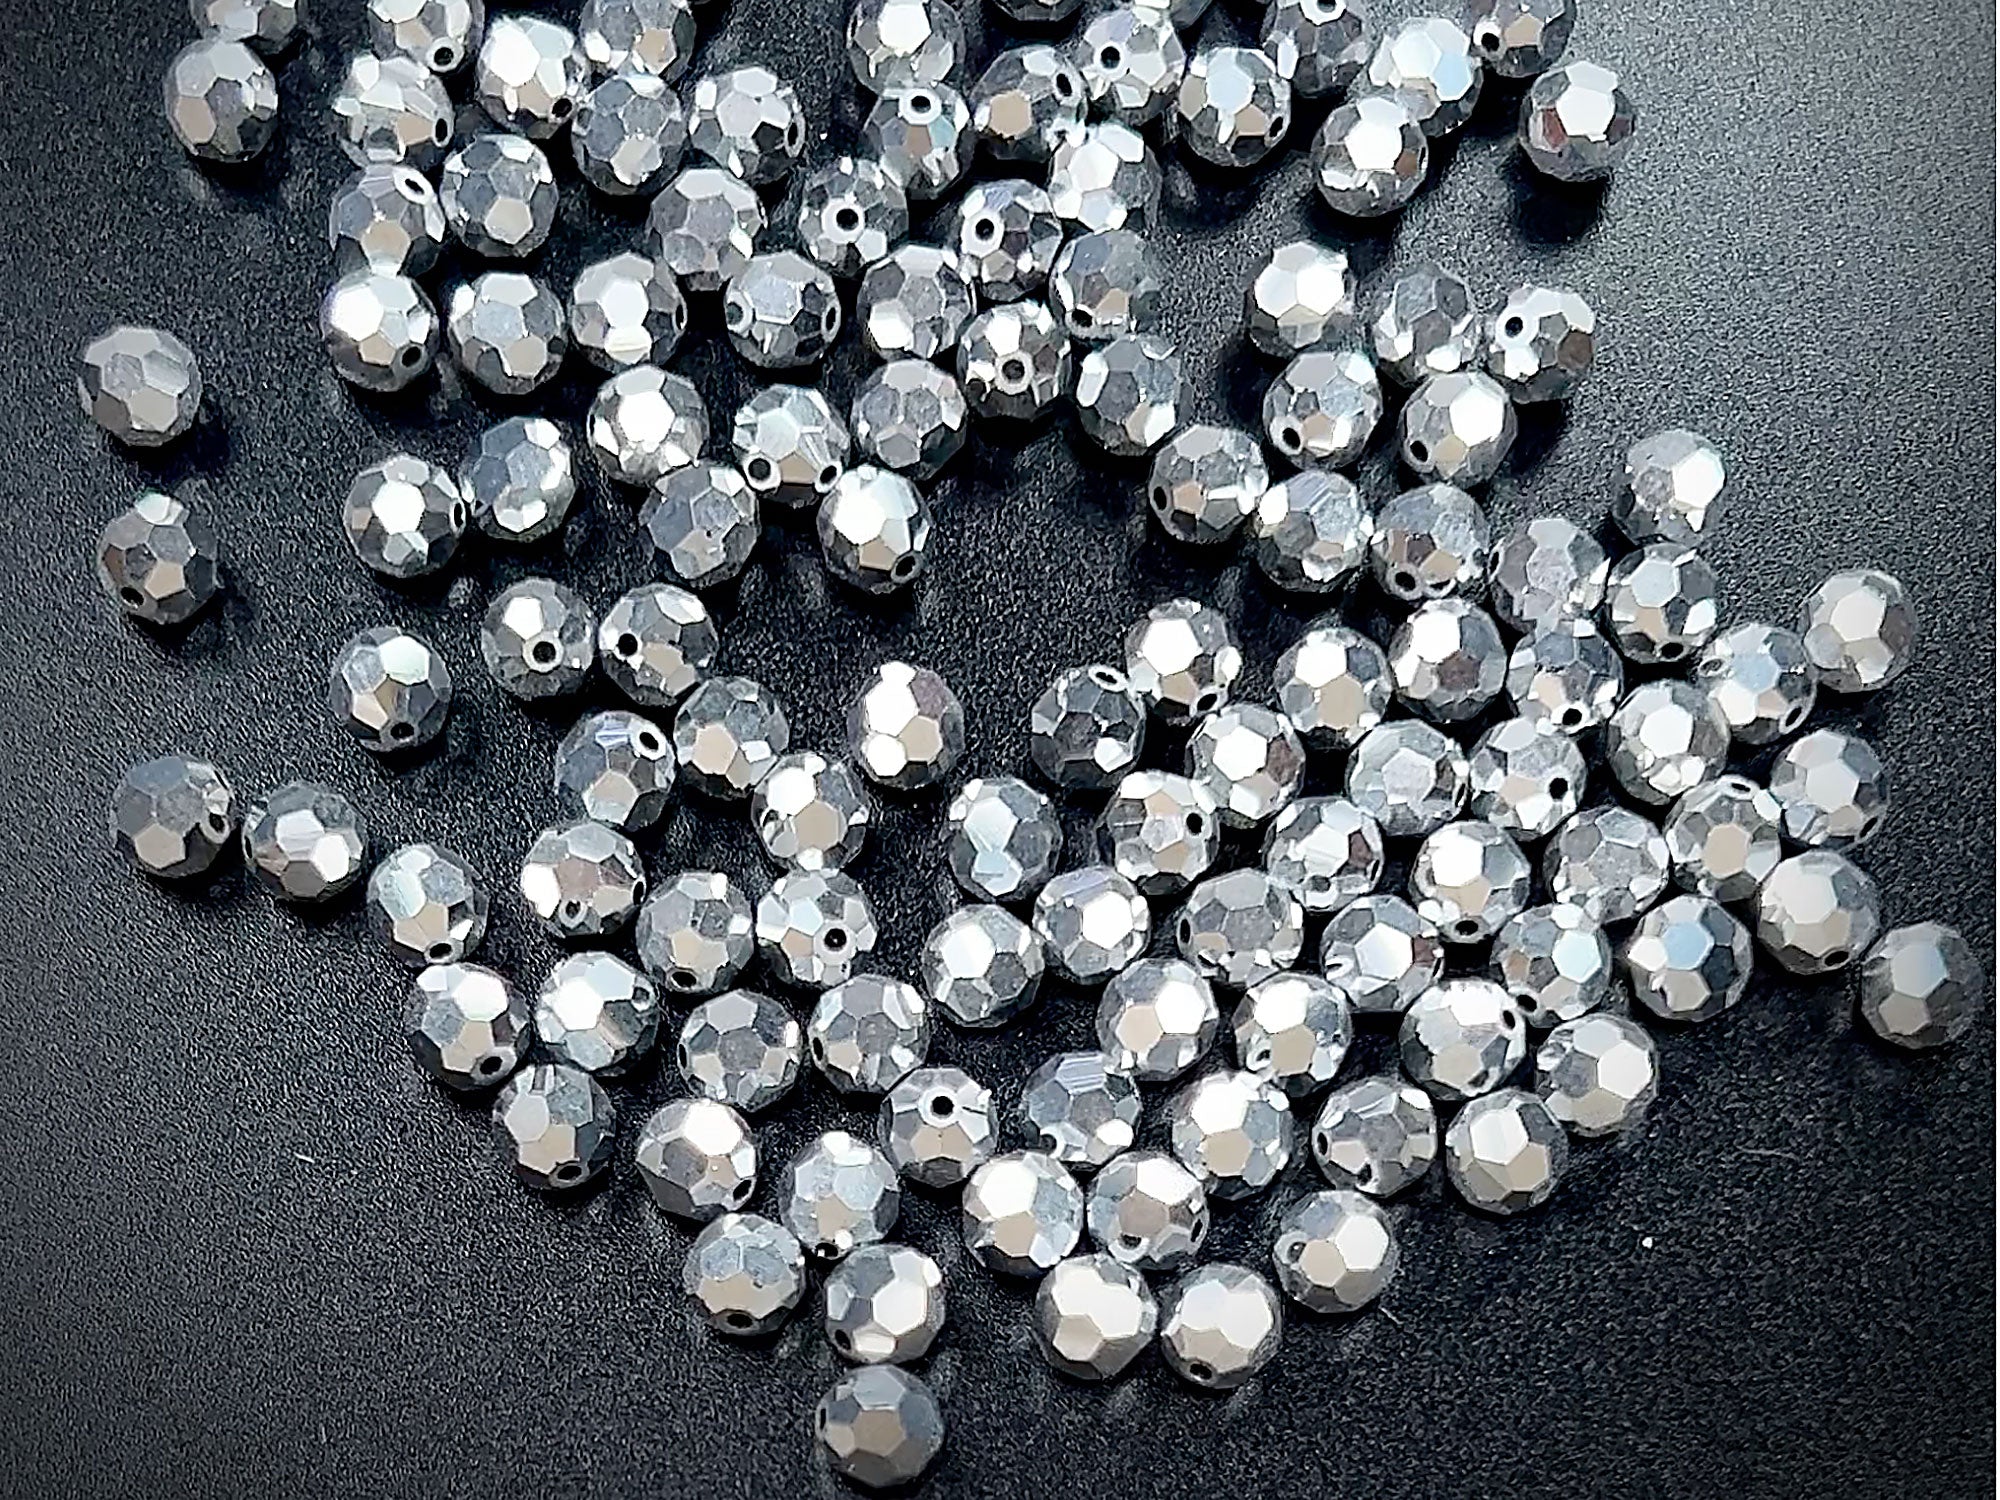 Crystal Labrador Fully coated Czech Machine Cut Round Crystal Beads Silver Rosary Beads 6mm